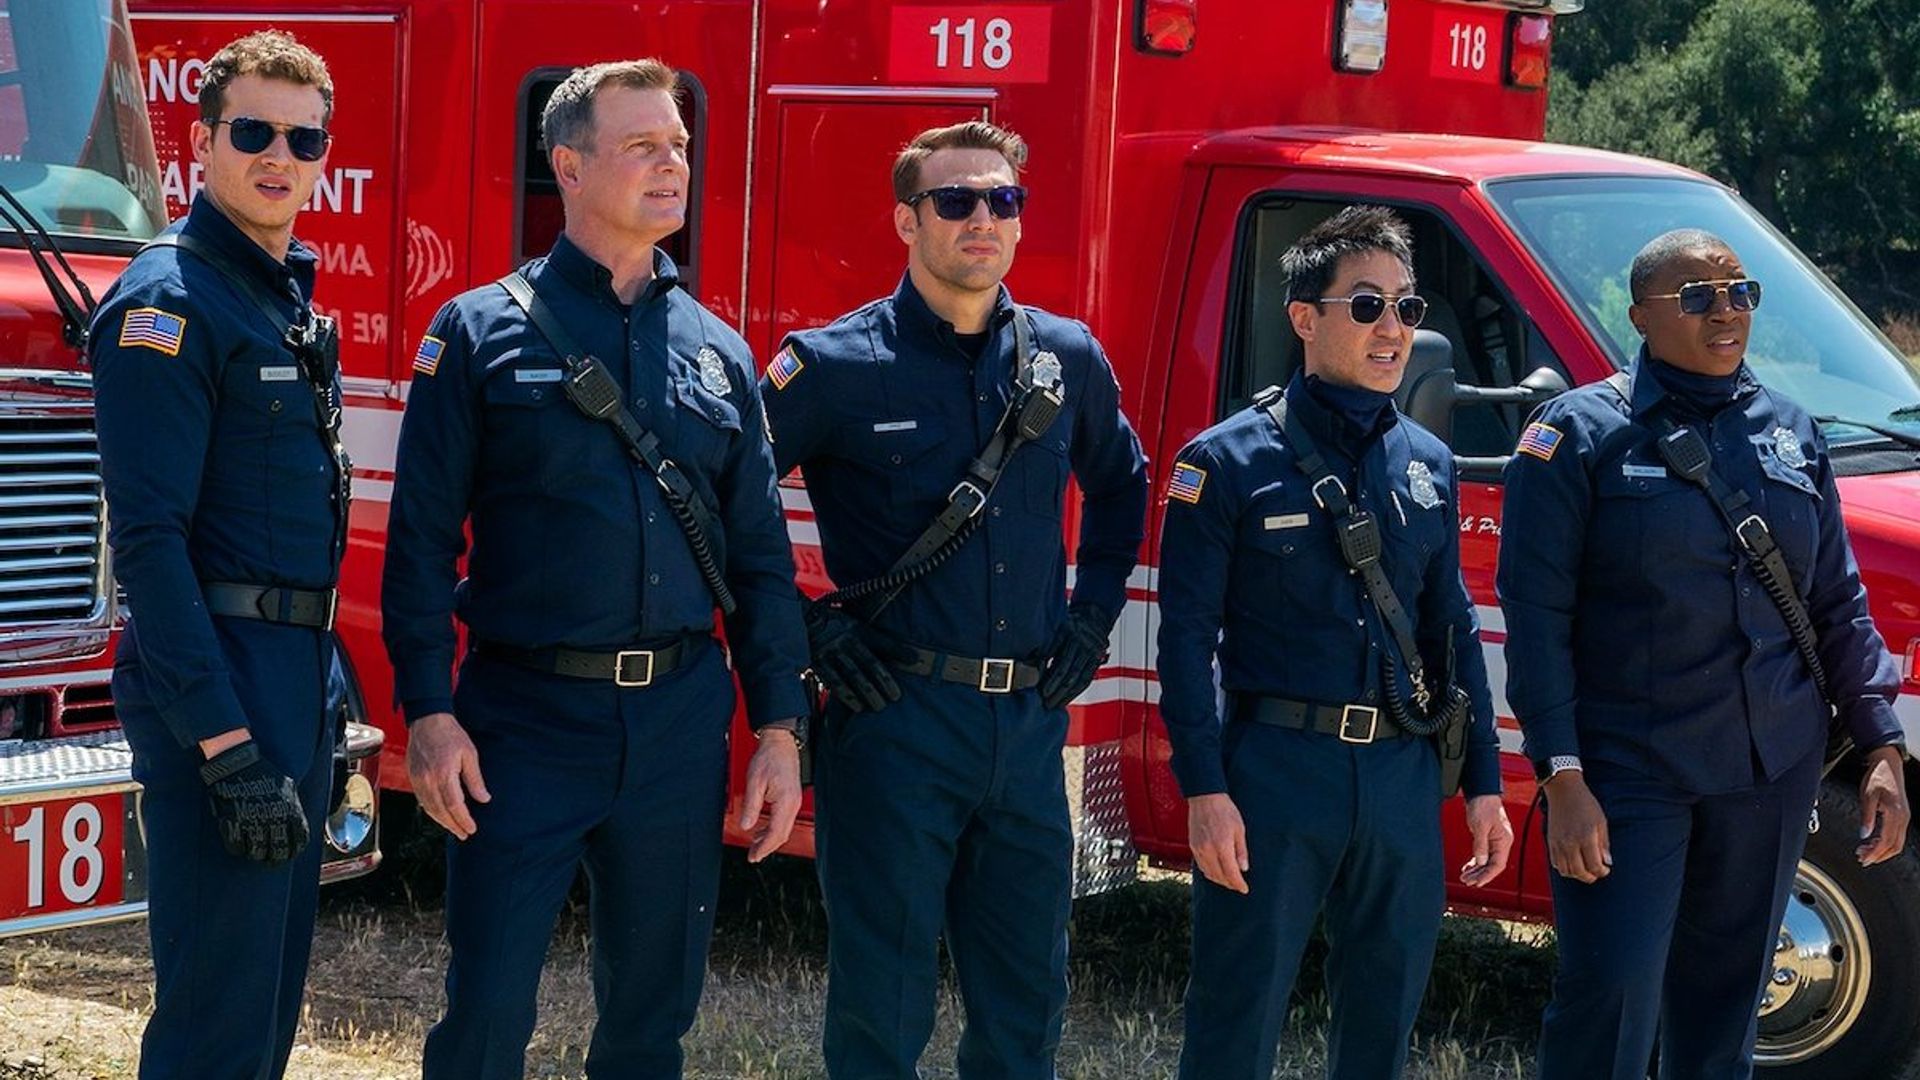 9-1-1 season five trailer drops and things are getting wild